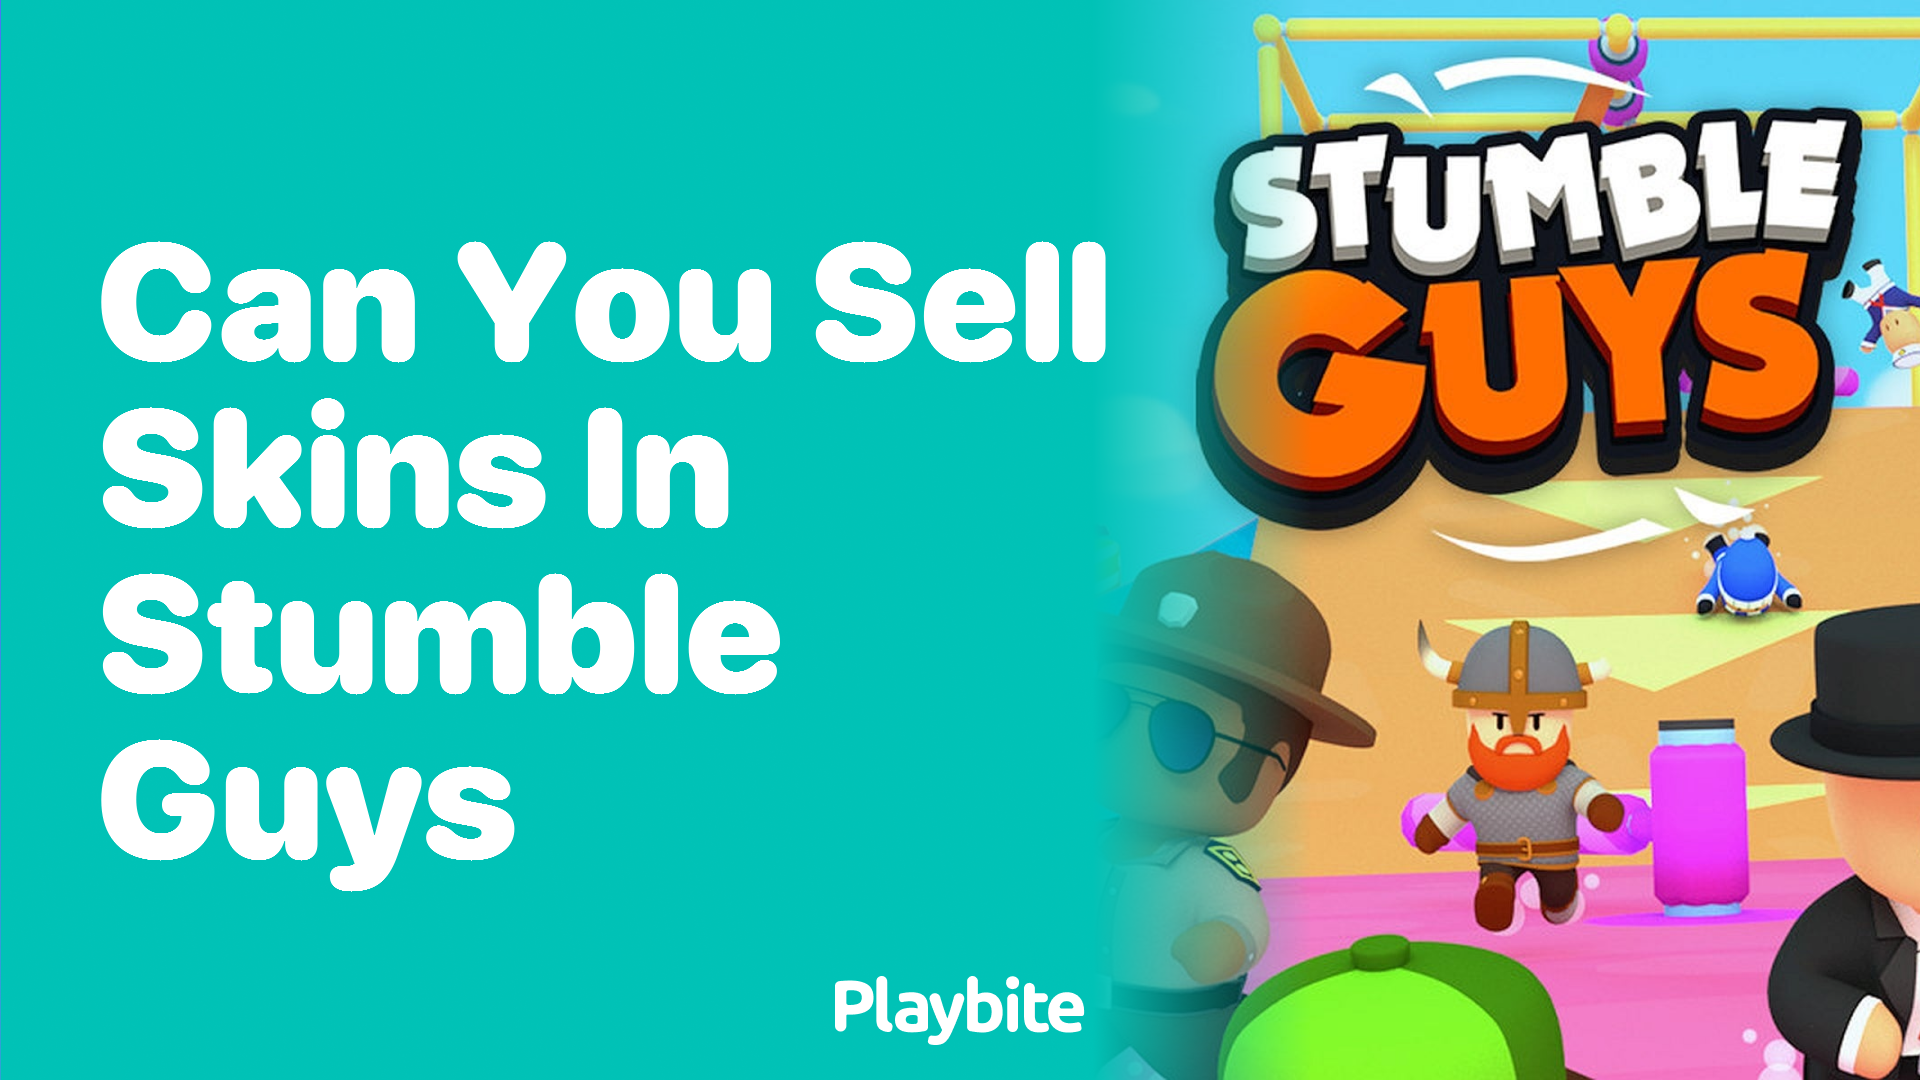 Can You Sell Skins in Stumble Guys? A Quick Look!